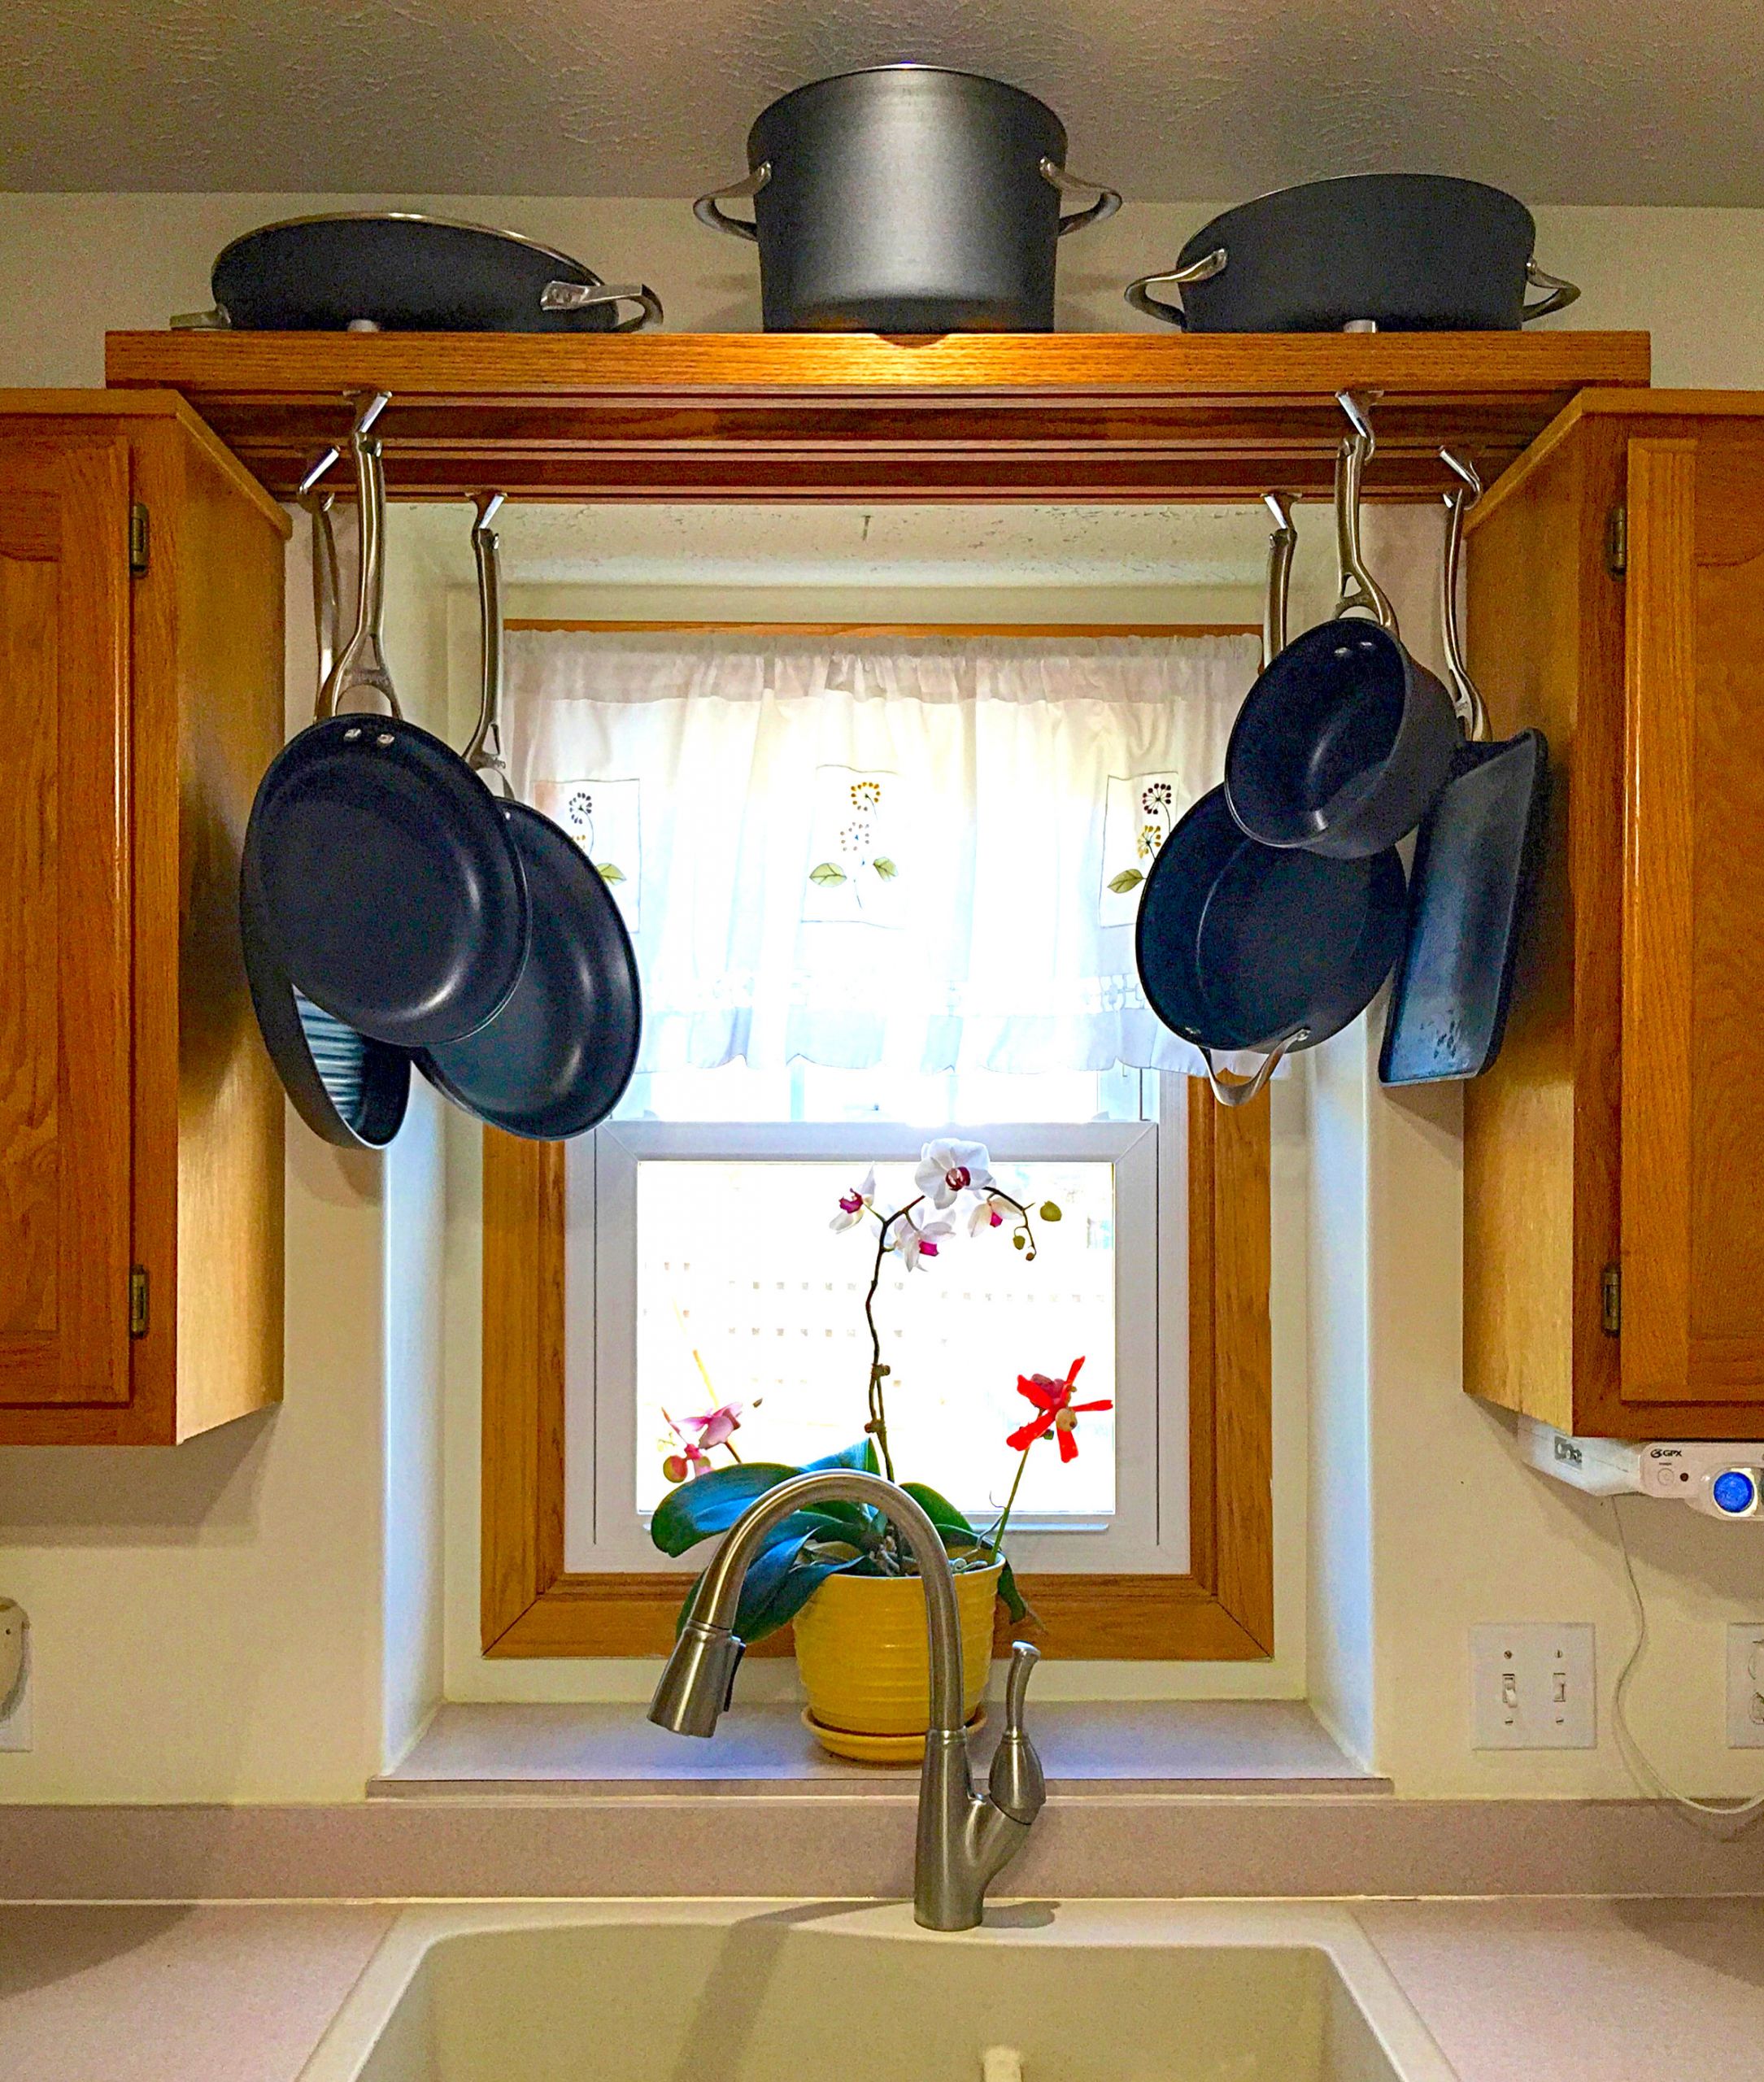 DIY Pots And Pans Rack
 Make use of space over the kitchen sink with this DIY pot